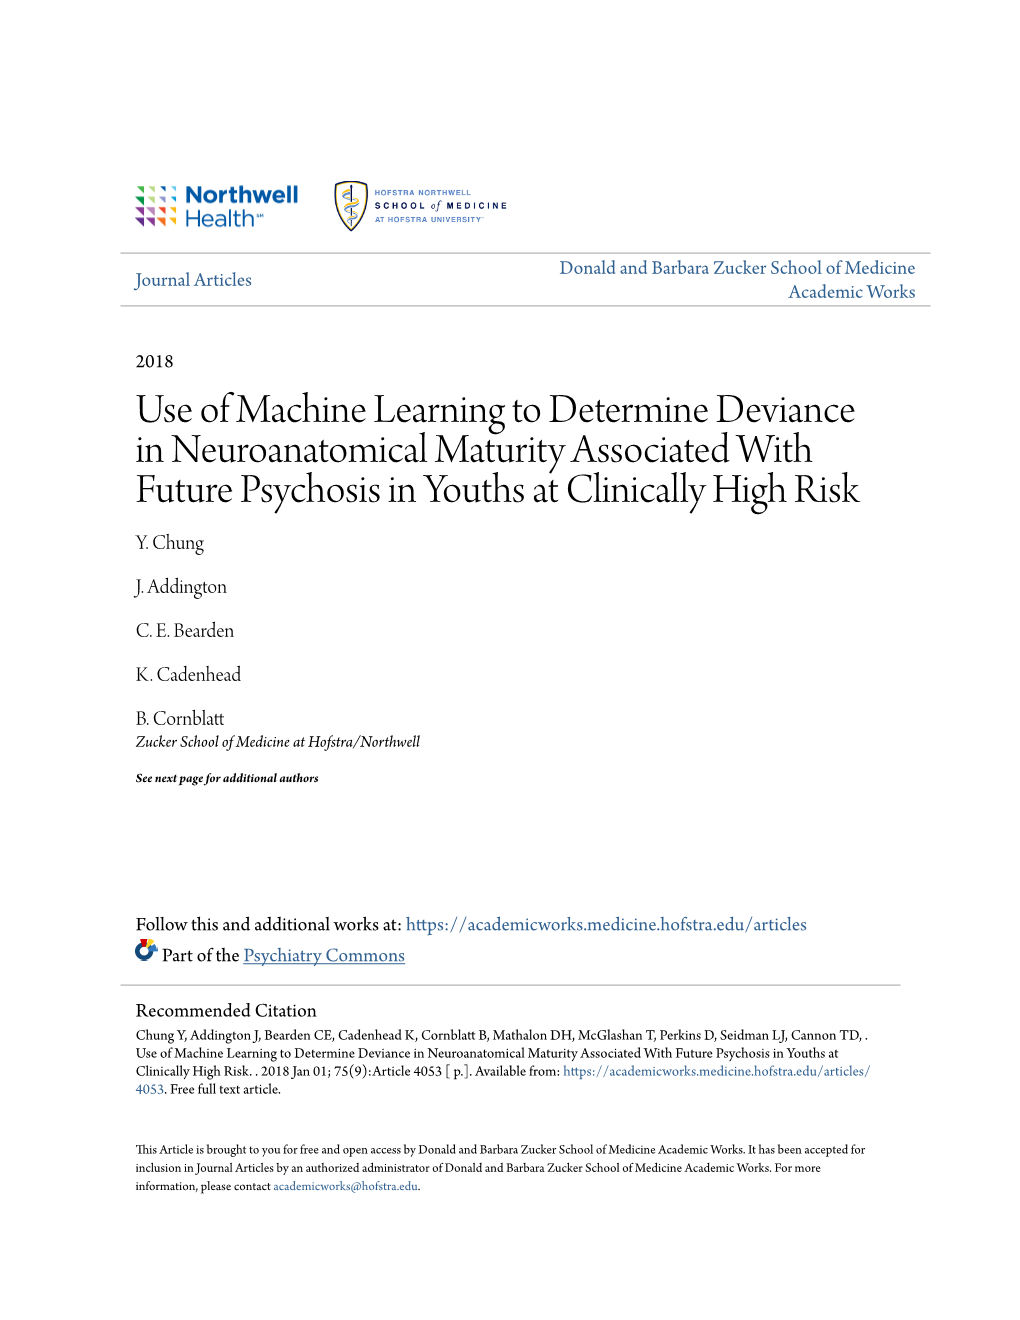 Use of Machine Learning to Determine Deviance in Neuroanatomical Maturity Associated with Future Psychosis in Youths at Clinically High Risk Y